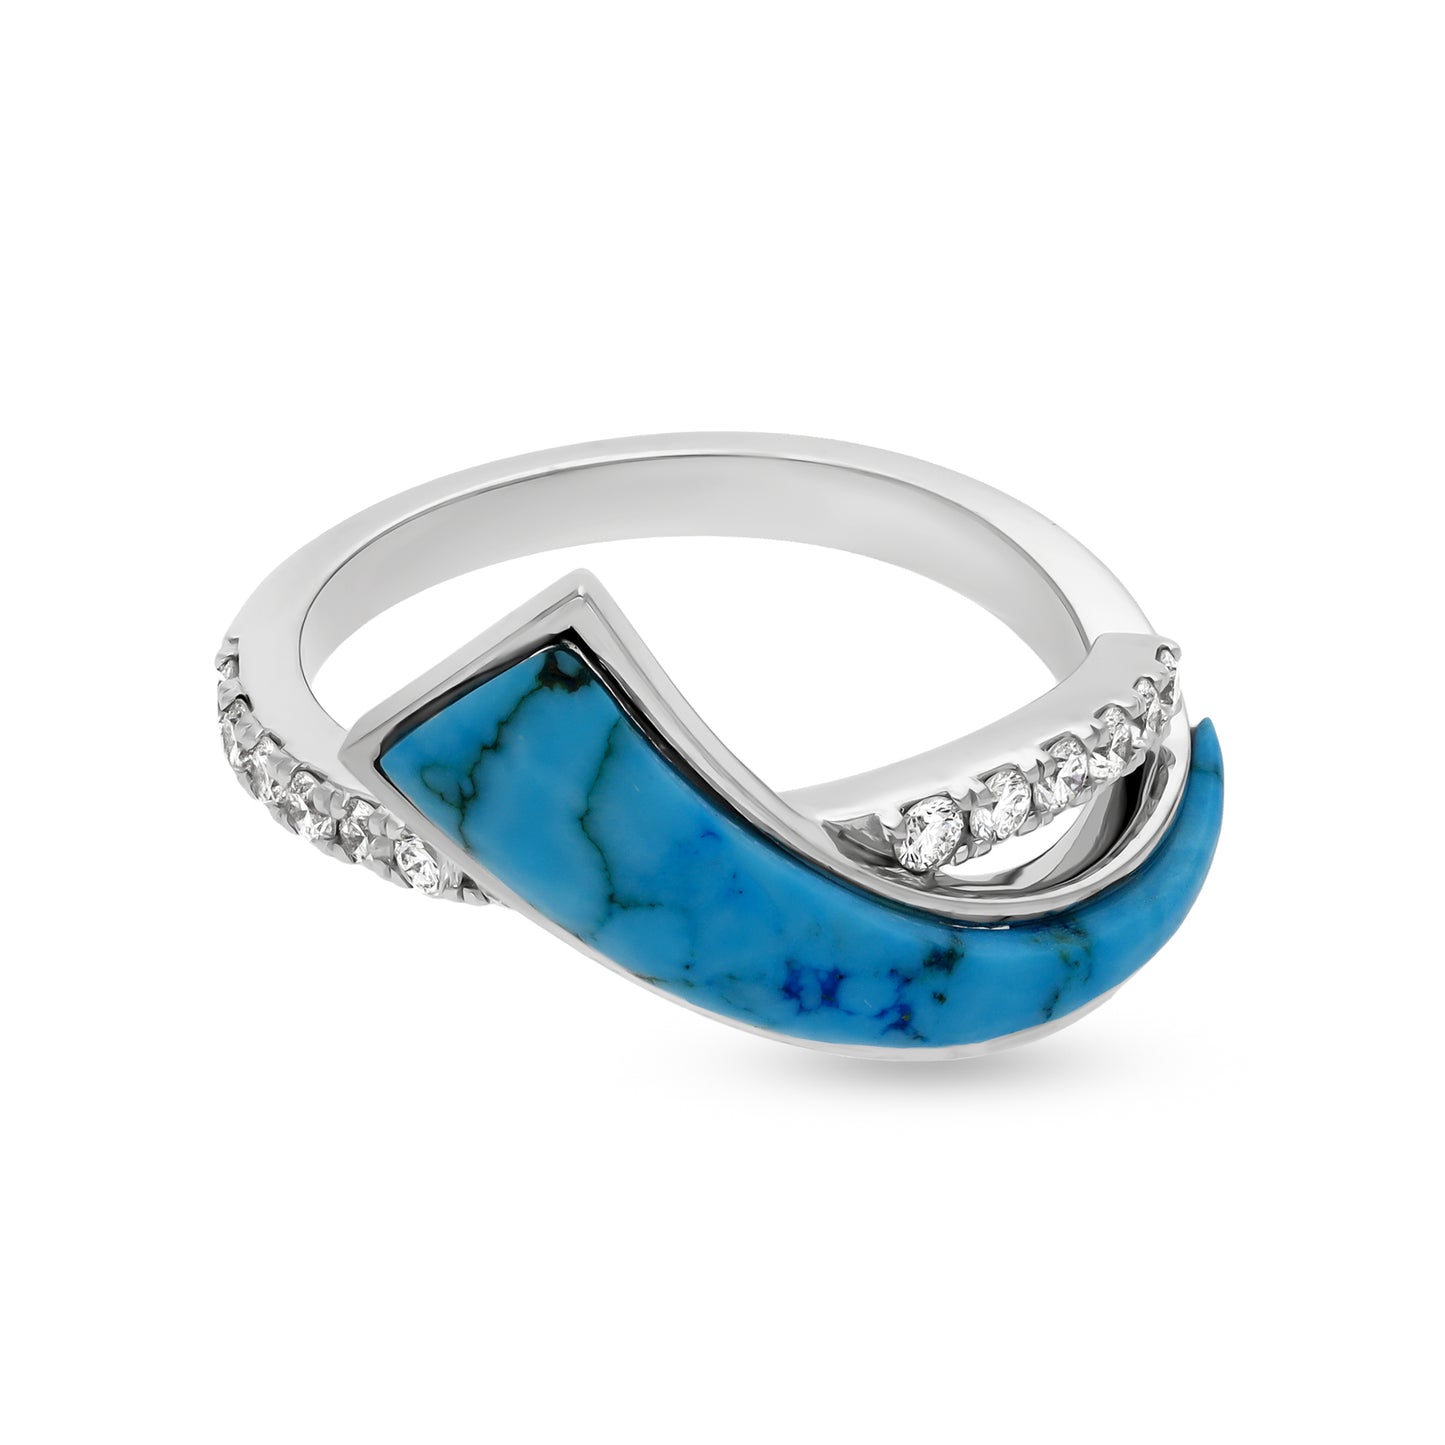 Tropical Turquoise With Round Natural Diamonds White Gold Ring Gift for Wedding